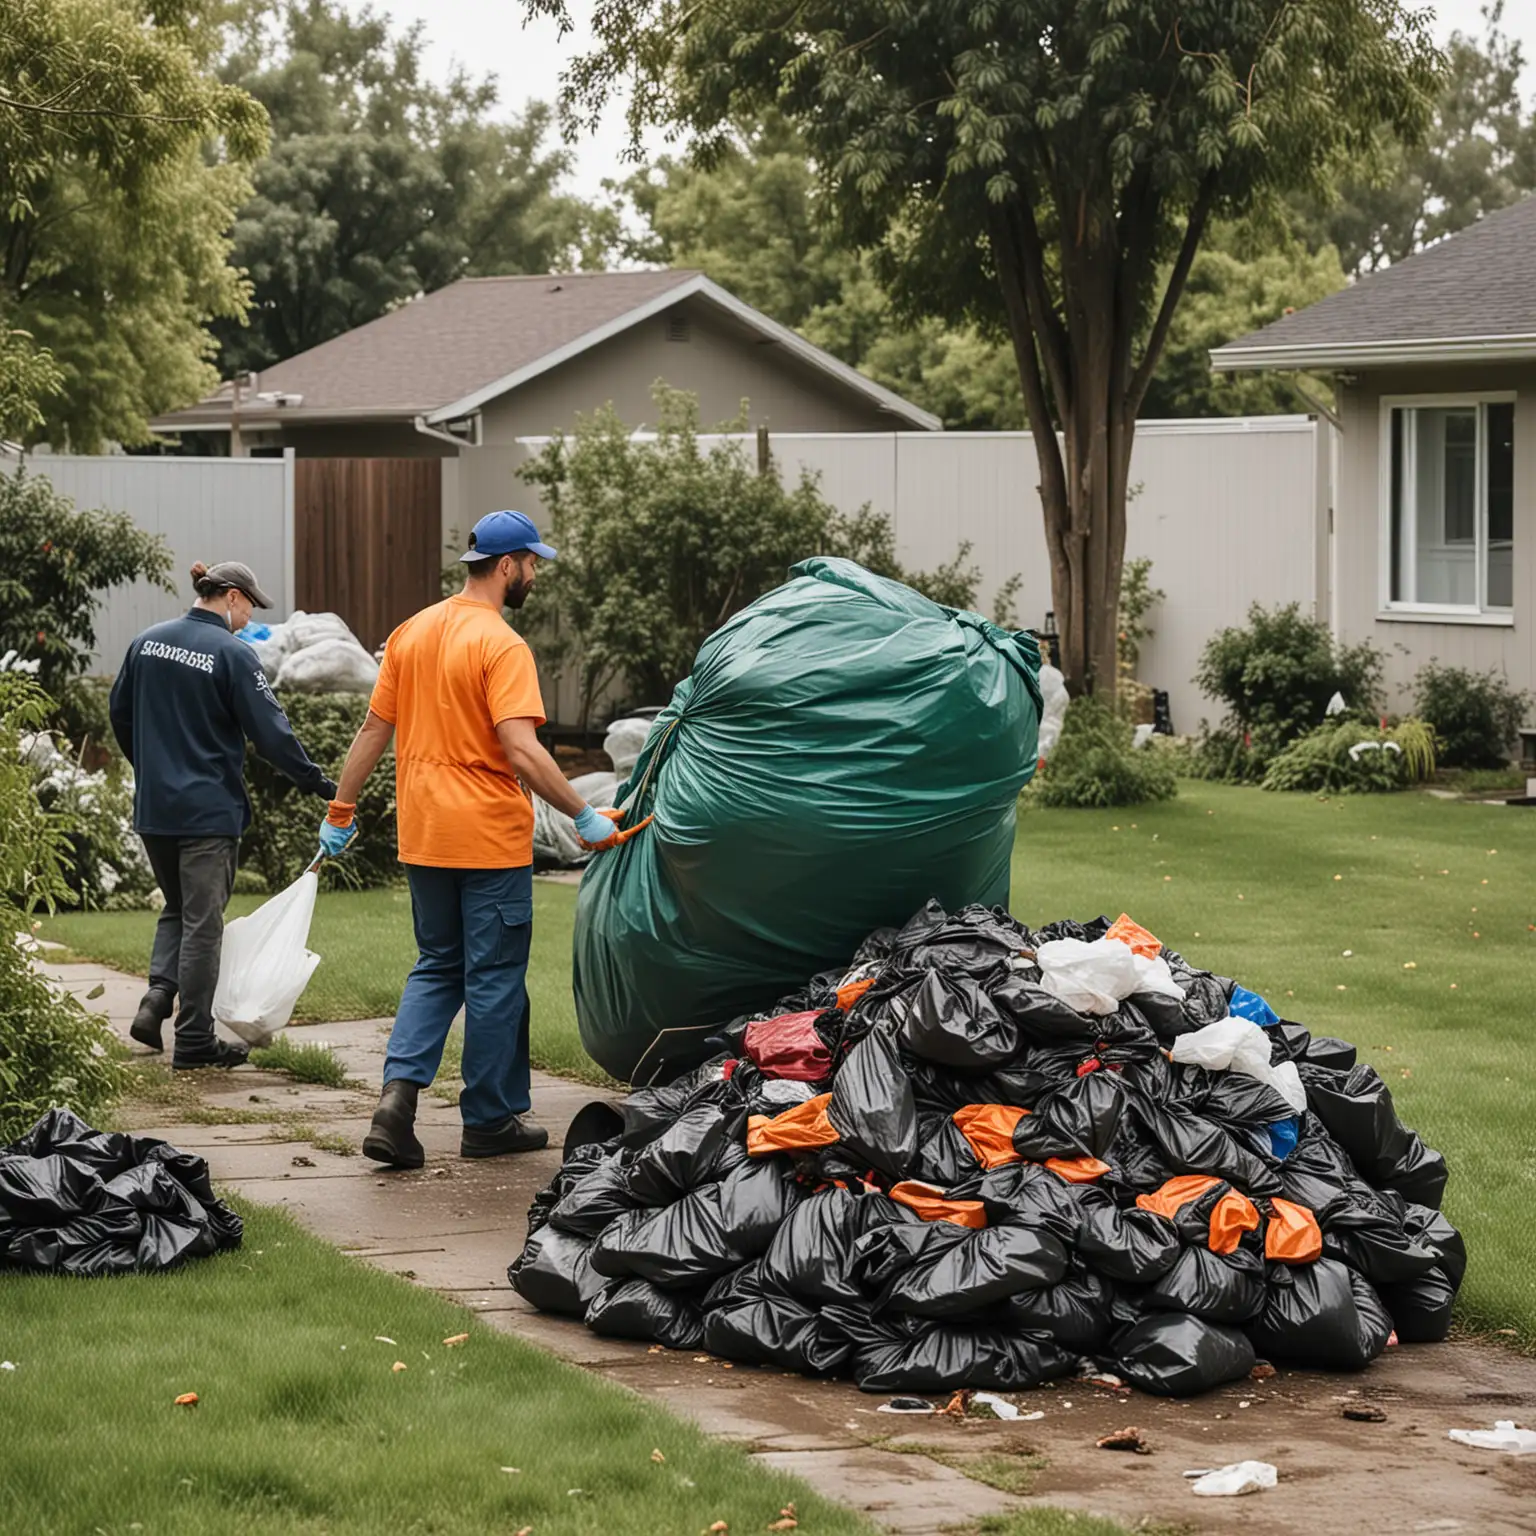 Professional Cleaners Clearing and Hauling Garbage from a Yard